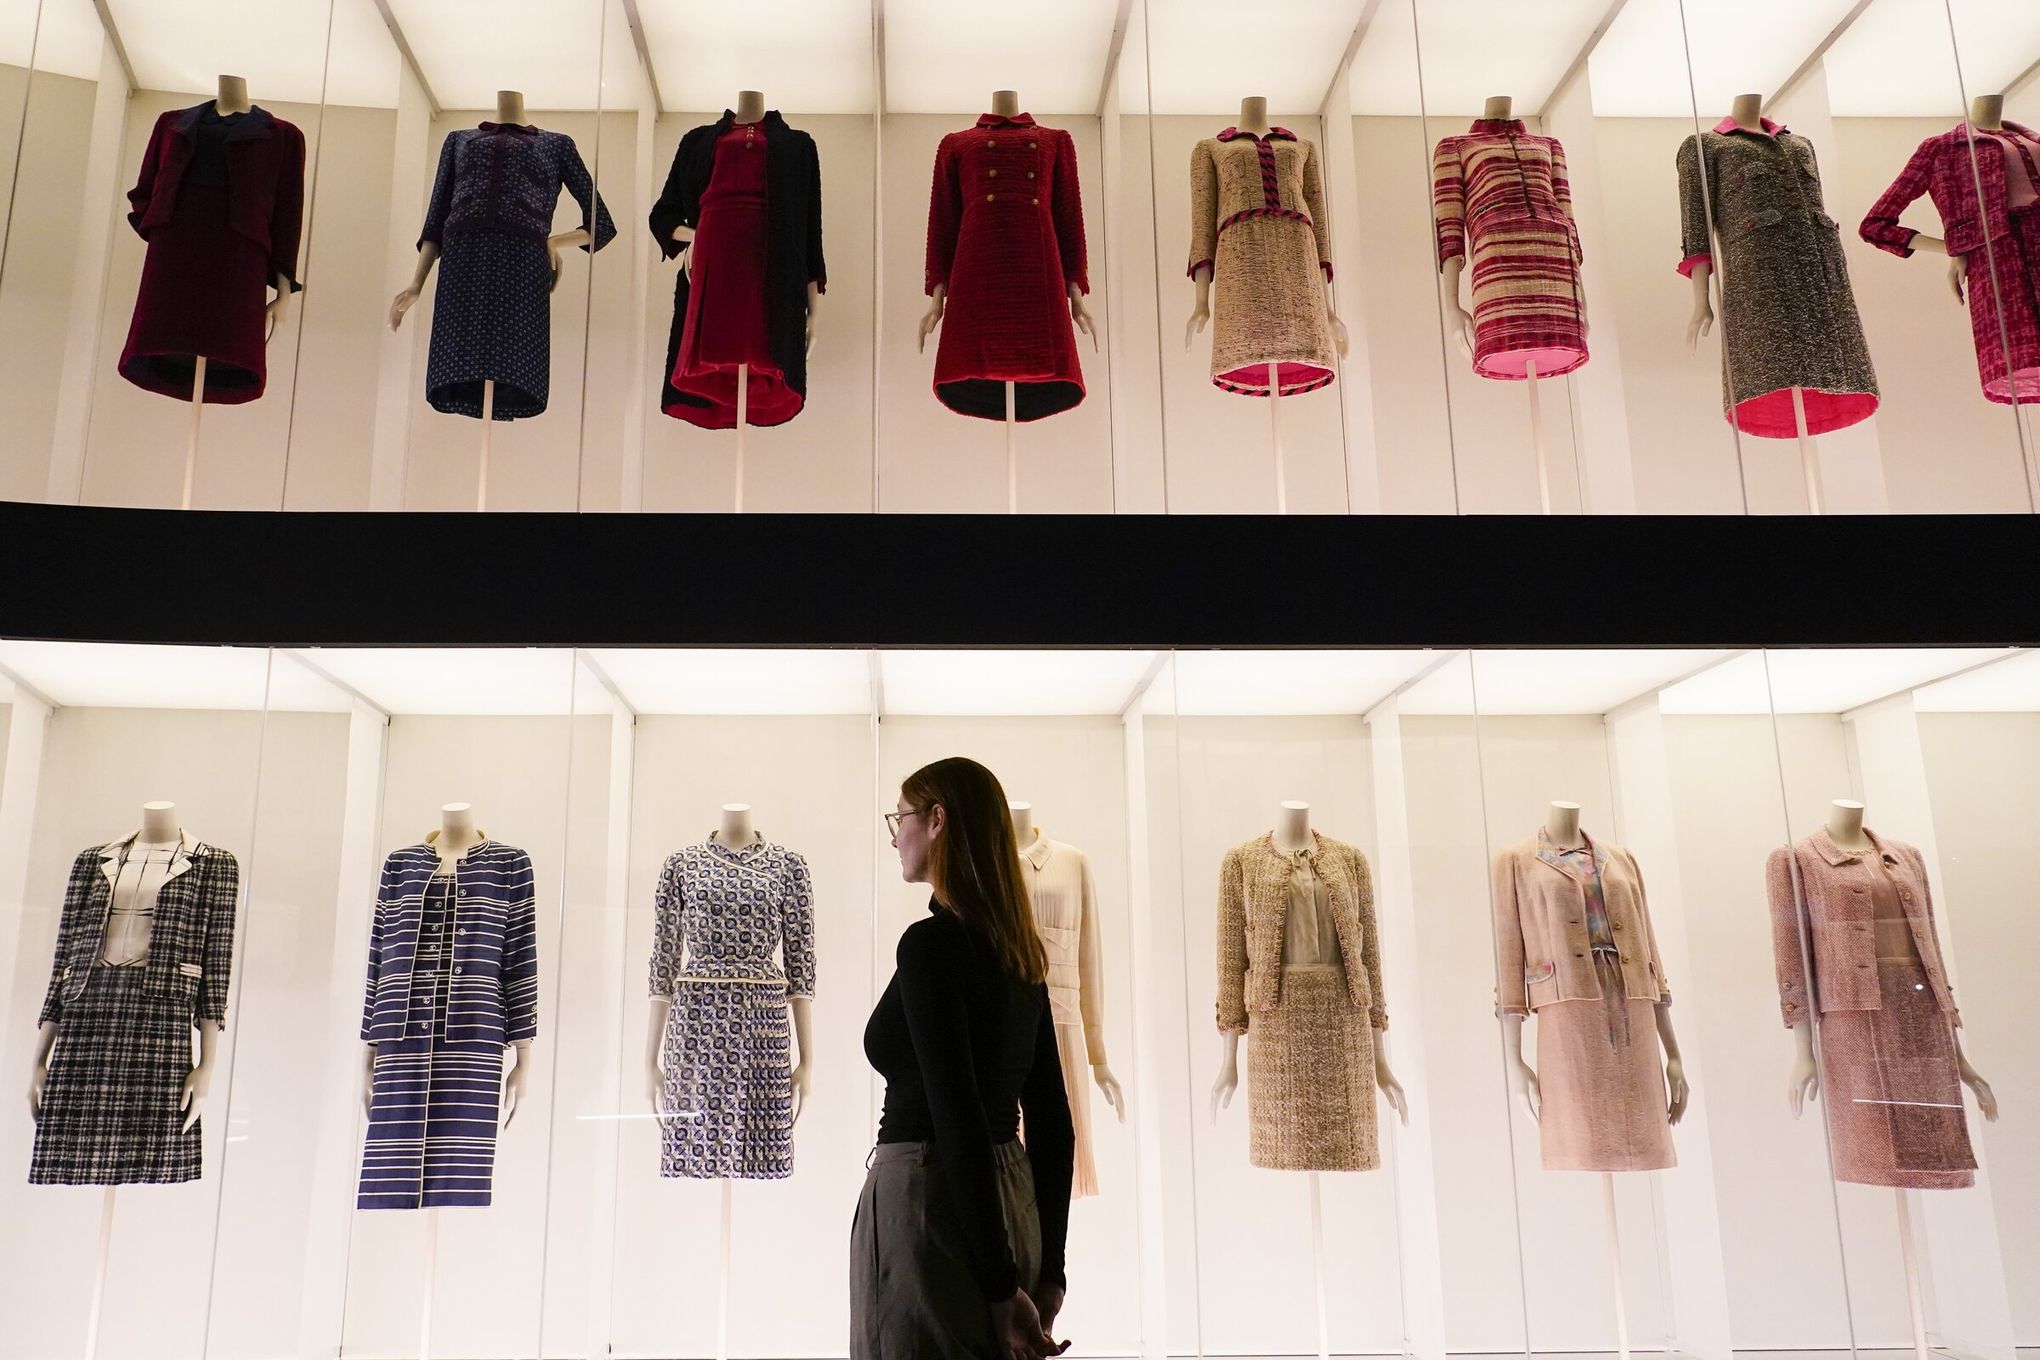 This sold-out exhibit in London is dedicated to the work of Chanel